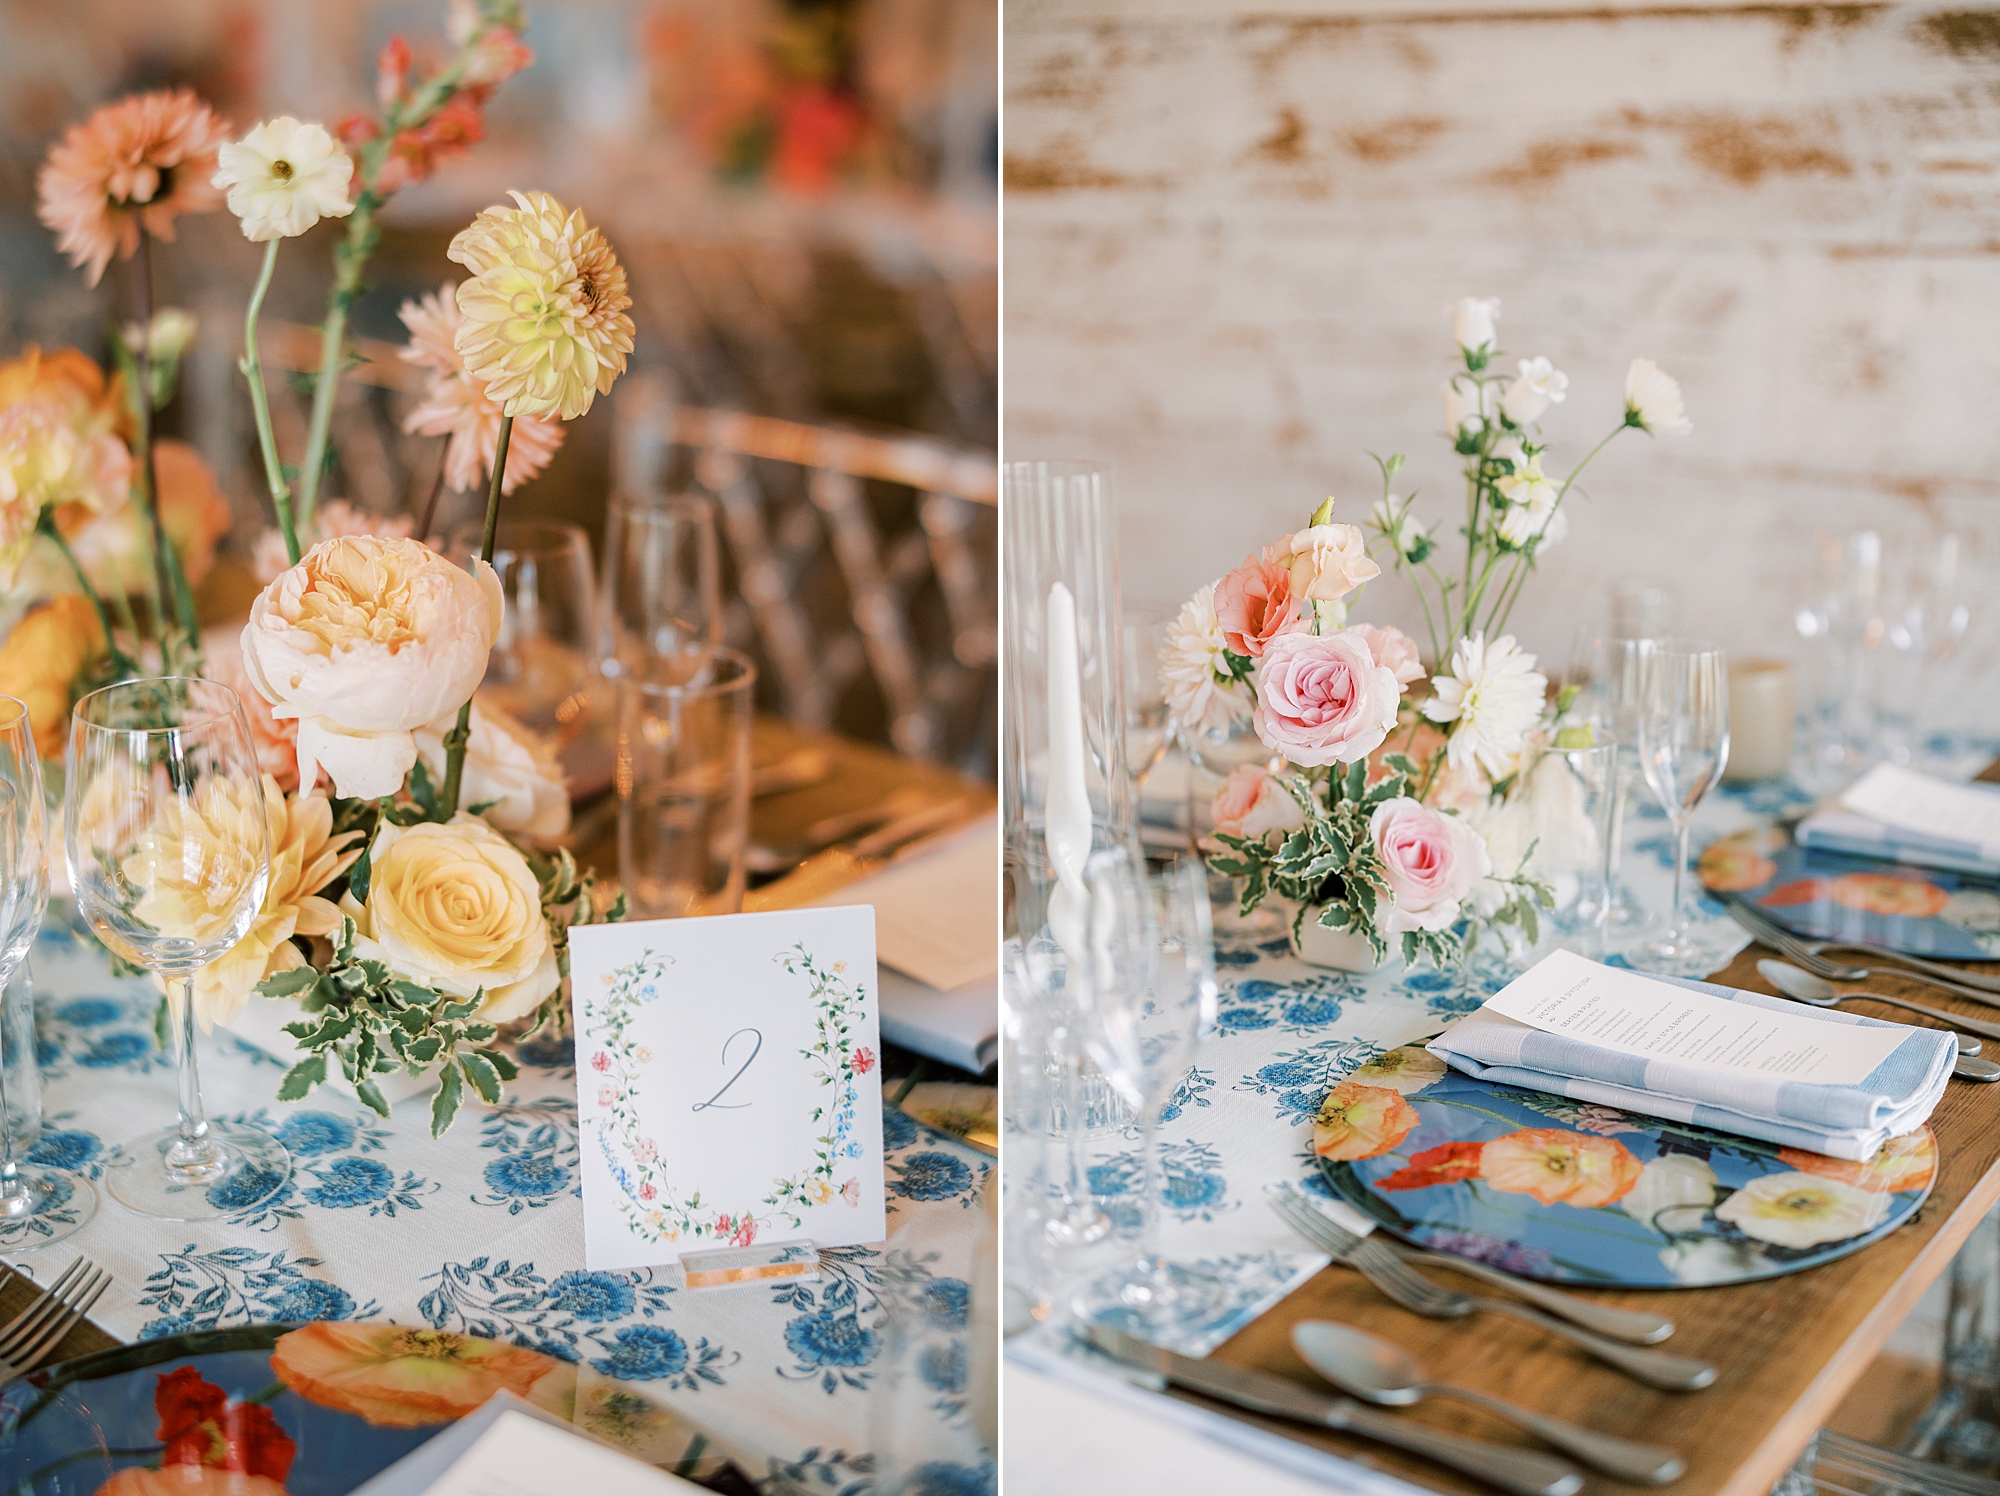 wedding reception at Terrain Gardens with blue and white table runner